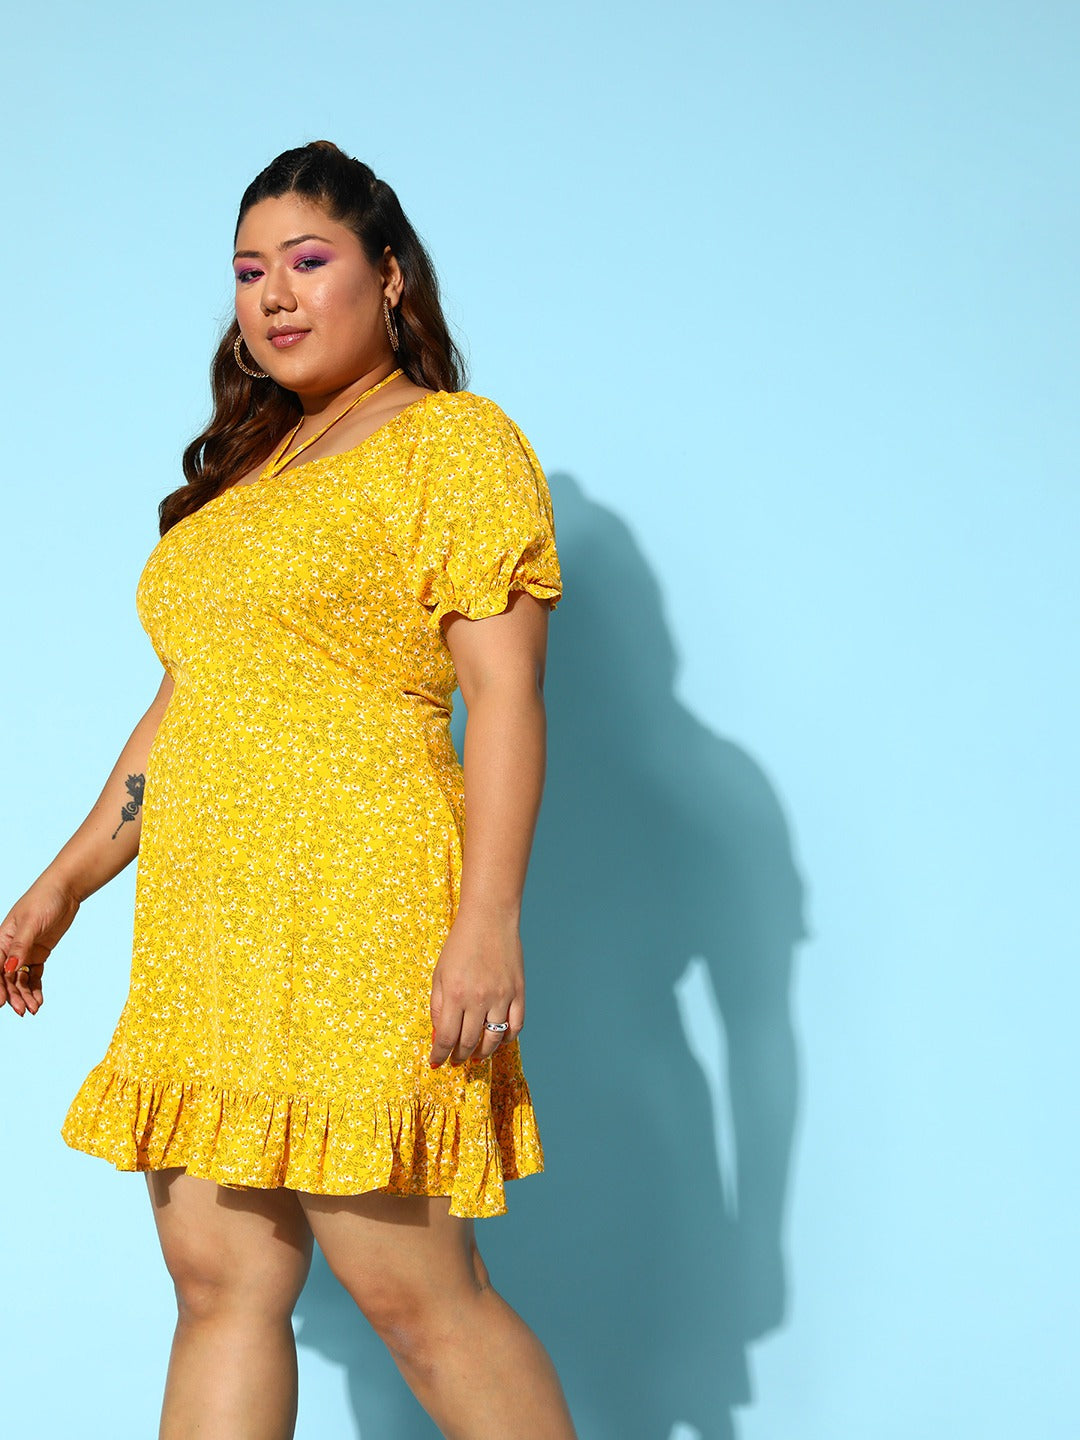 Colorful Plus Size Dresses for Spring and Summer by Sylvia